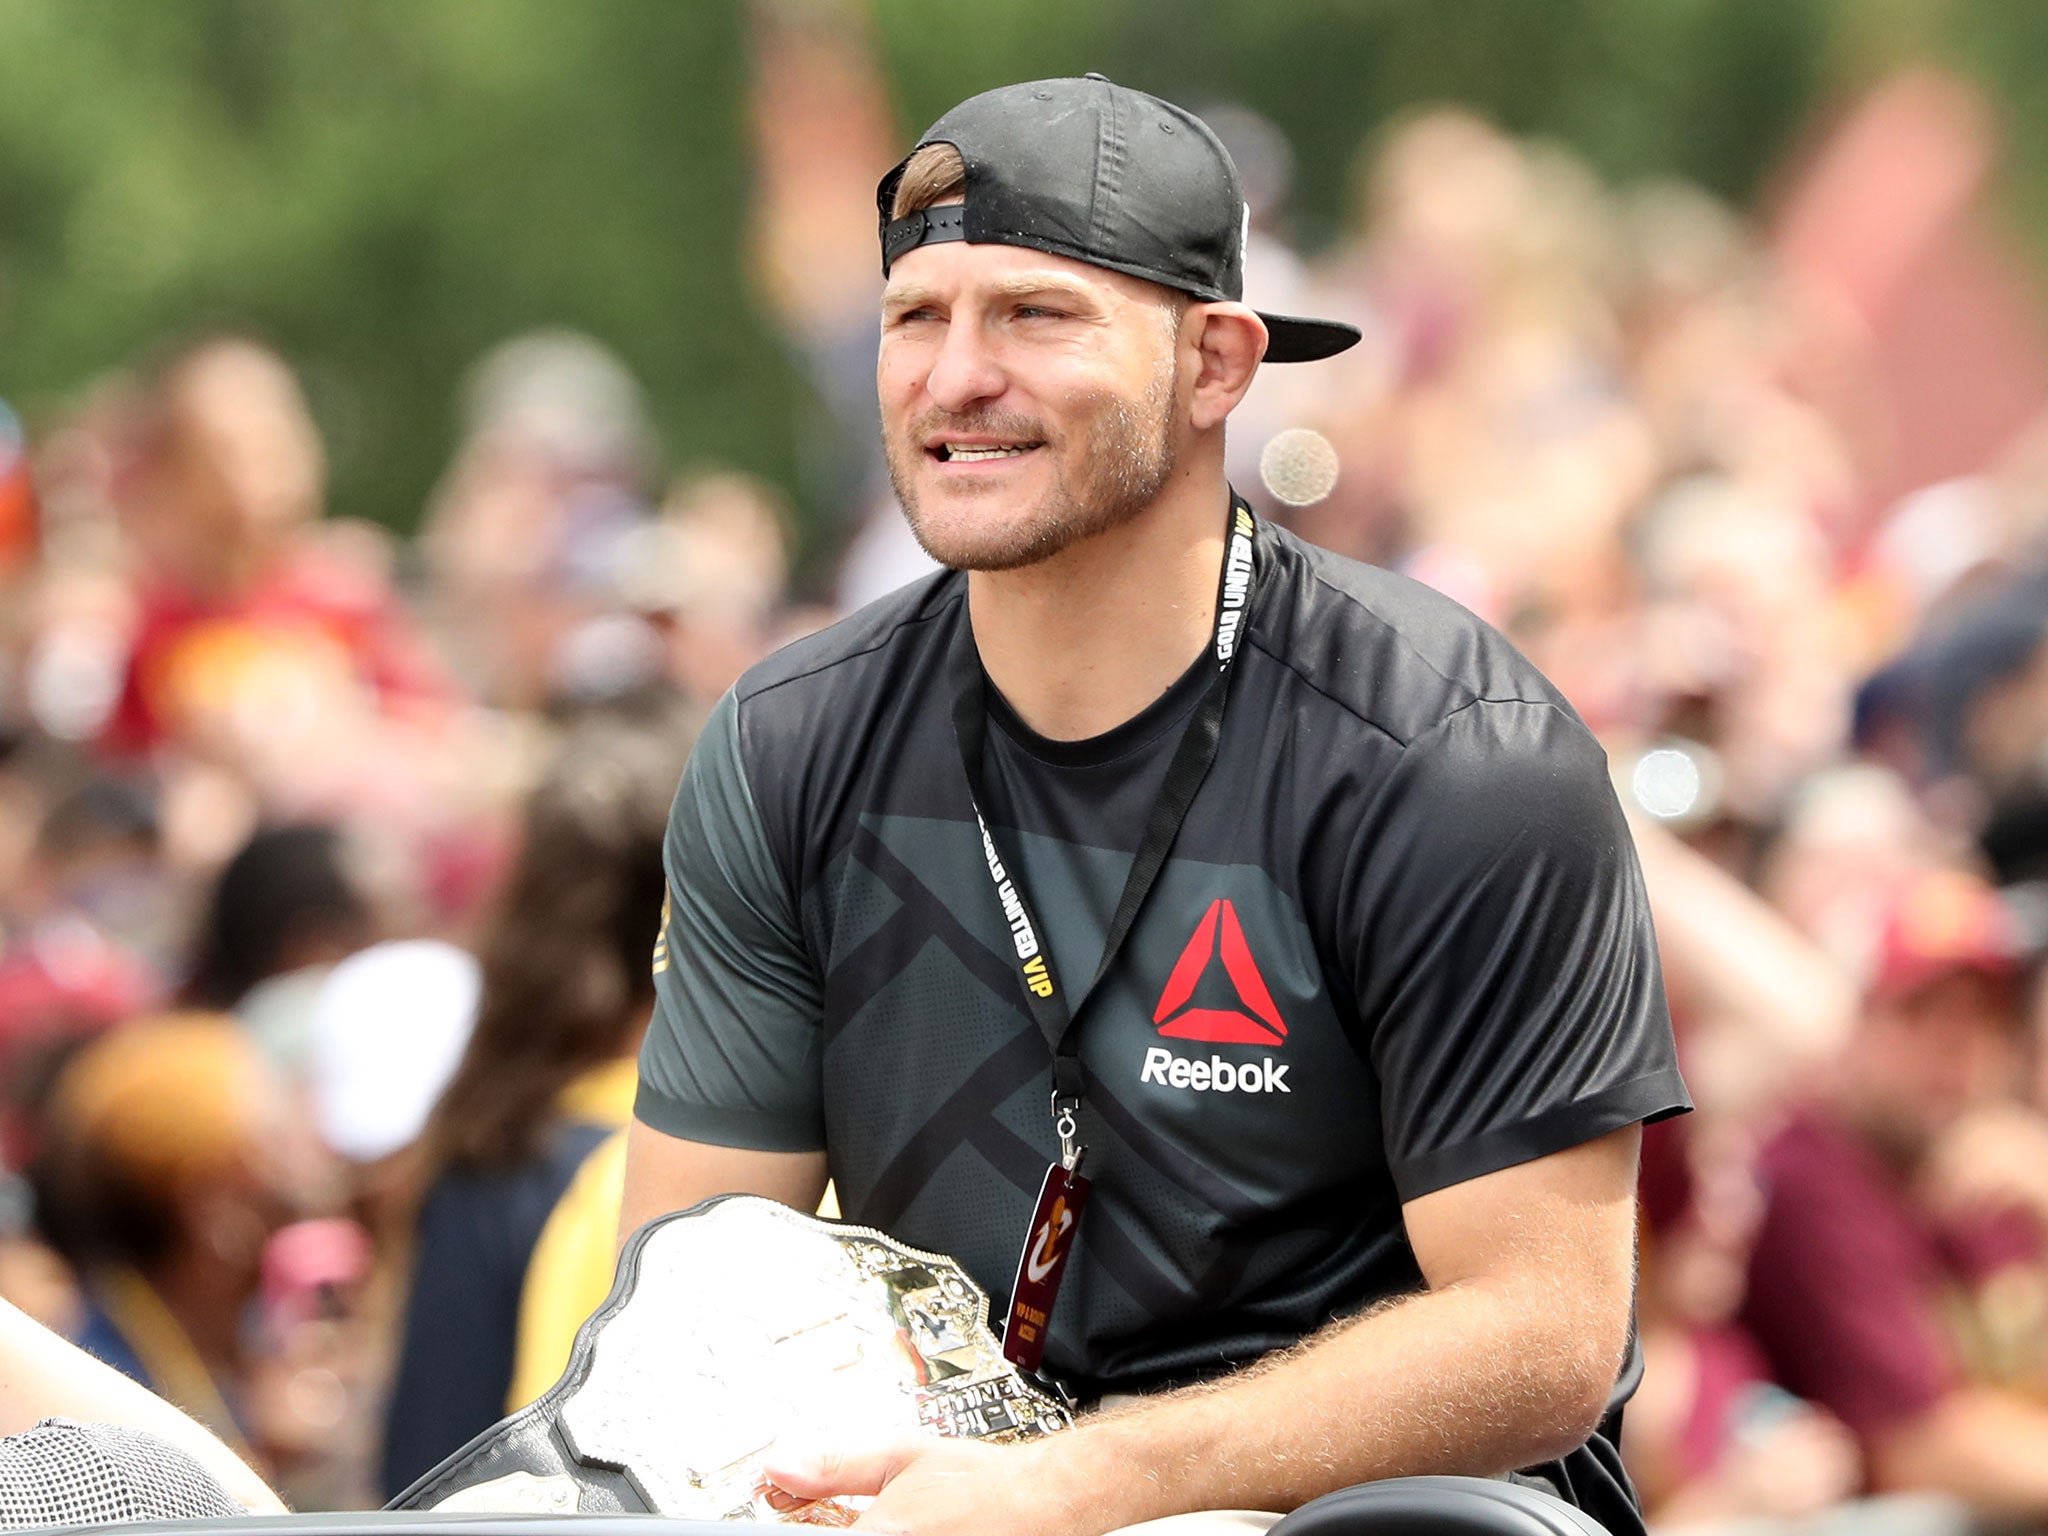 UFC heavyweight champion Stipe Miocic during the Cleveland Cavaliers 2016 NBA Championship victory parade and rally, June 2016